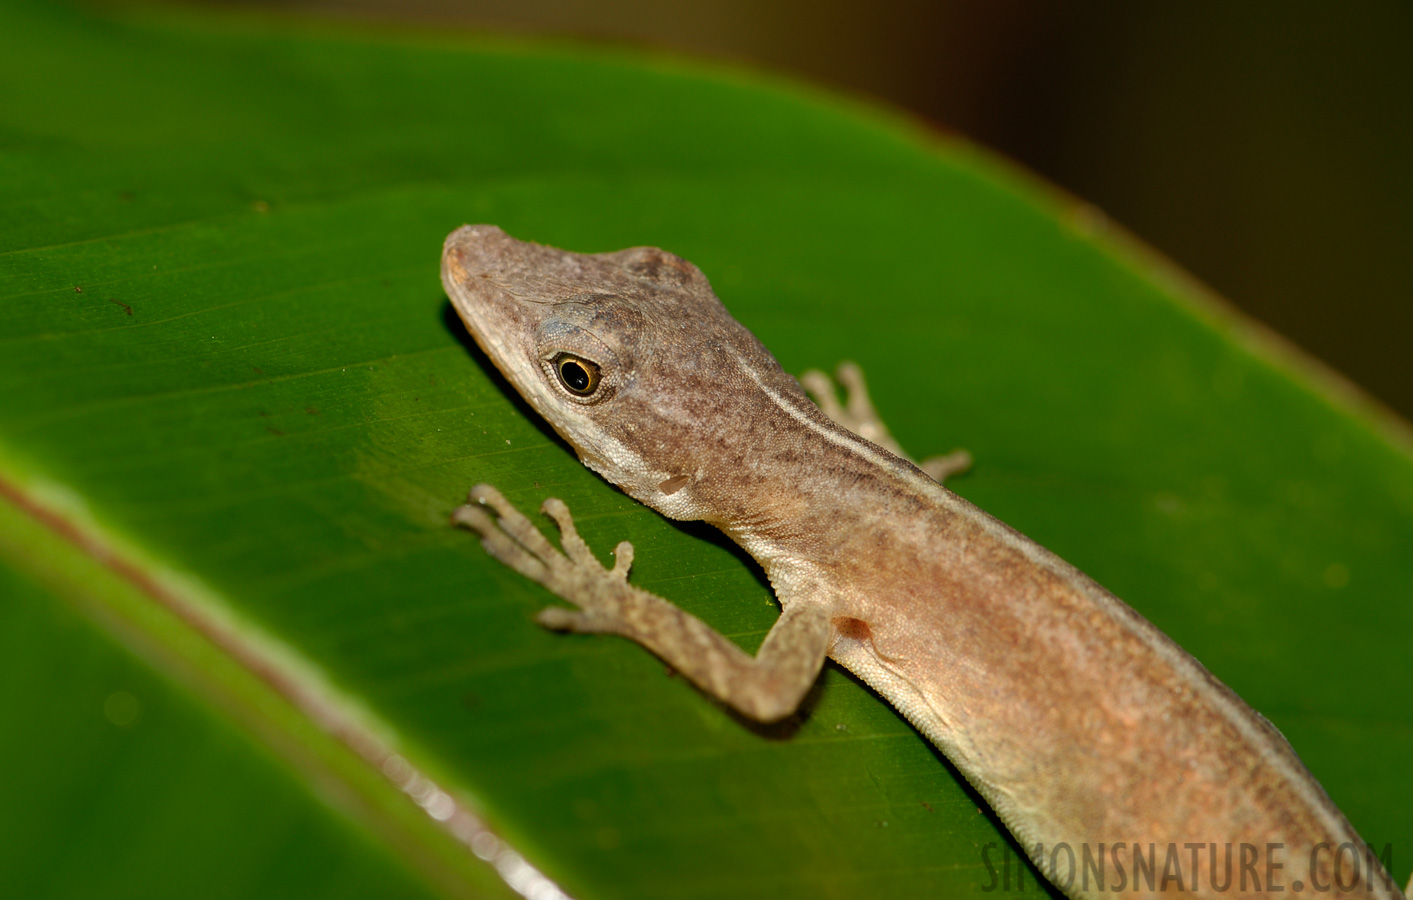 Anolis limifrons [105 mm, 1/60 sec at f / 10, ISO 100]